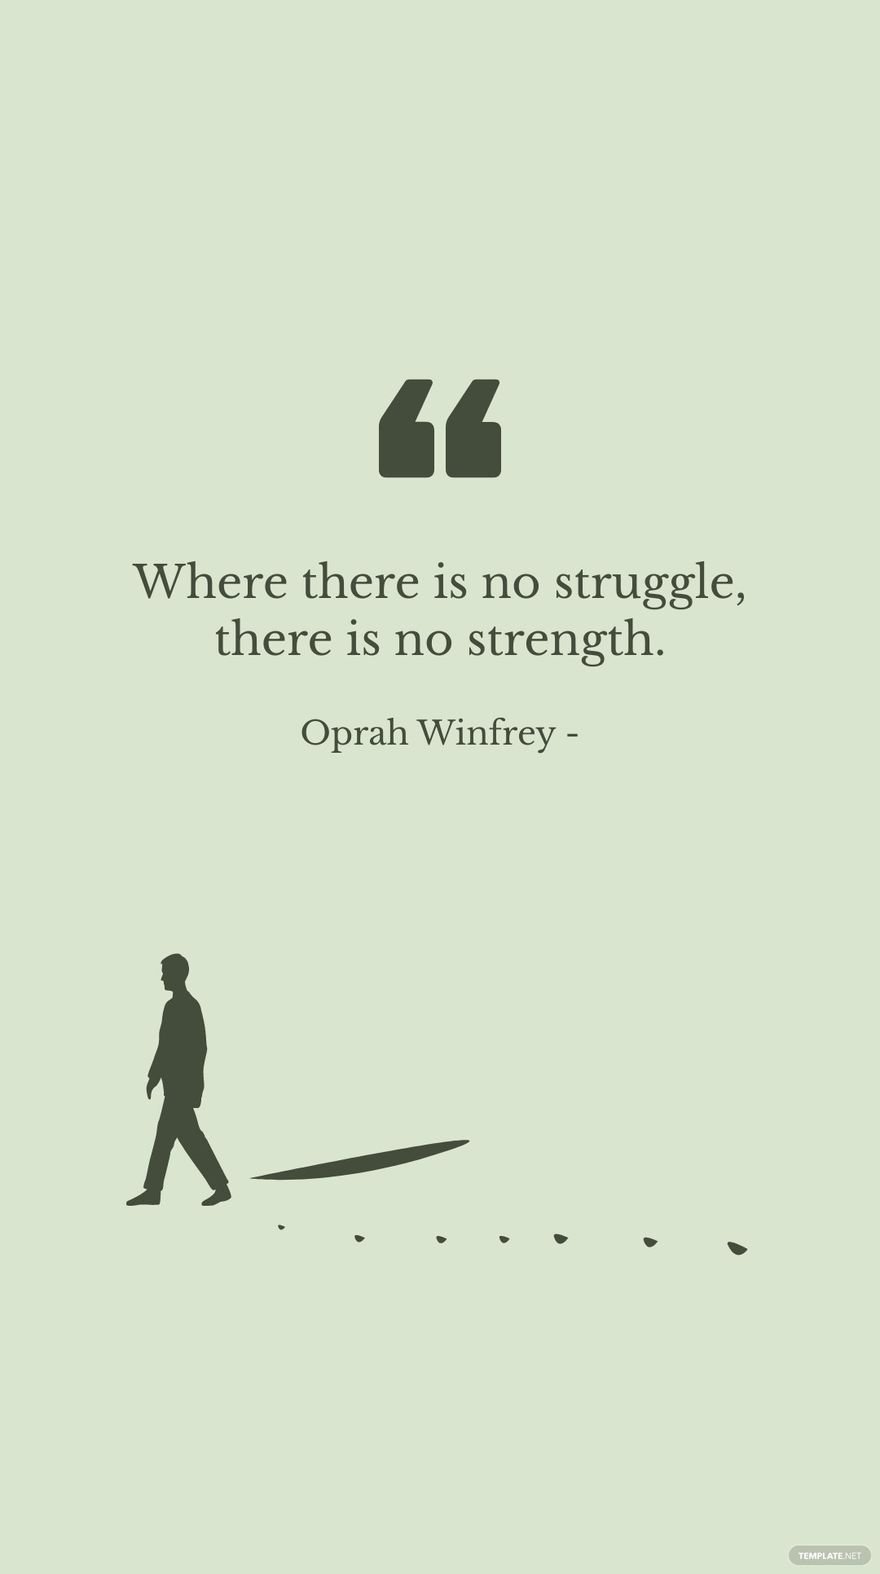 Free Oprah Winfrey - Where there is no struggle, there is no strength. in JPG